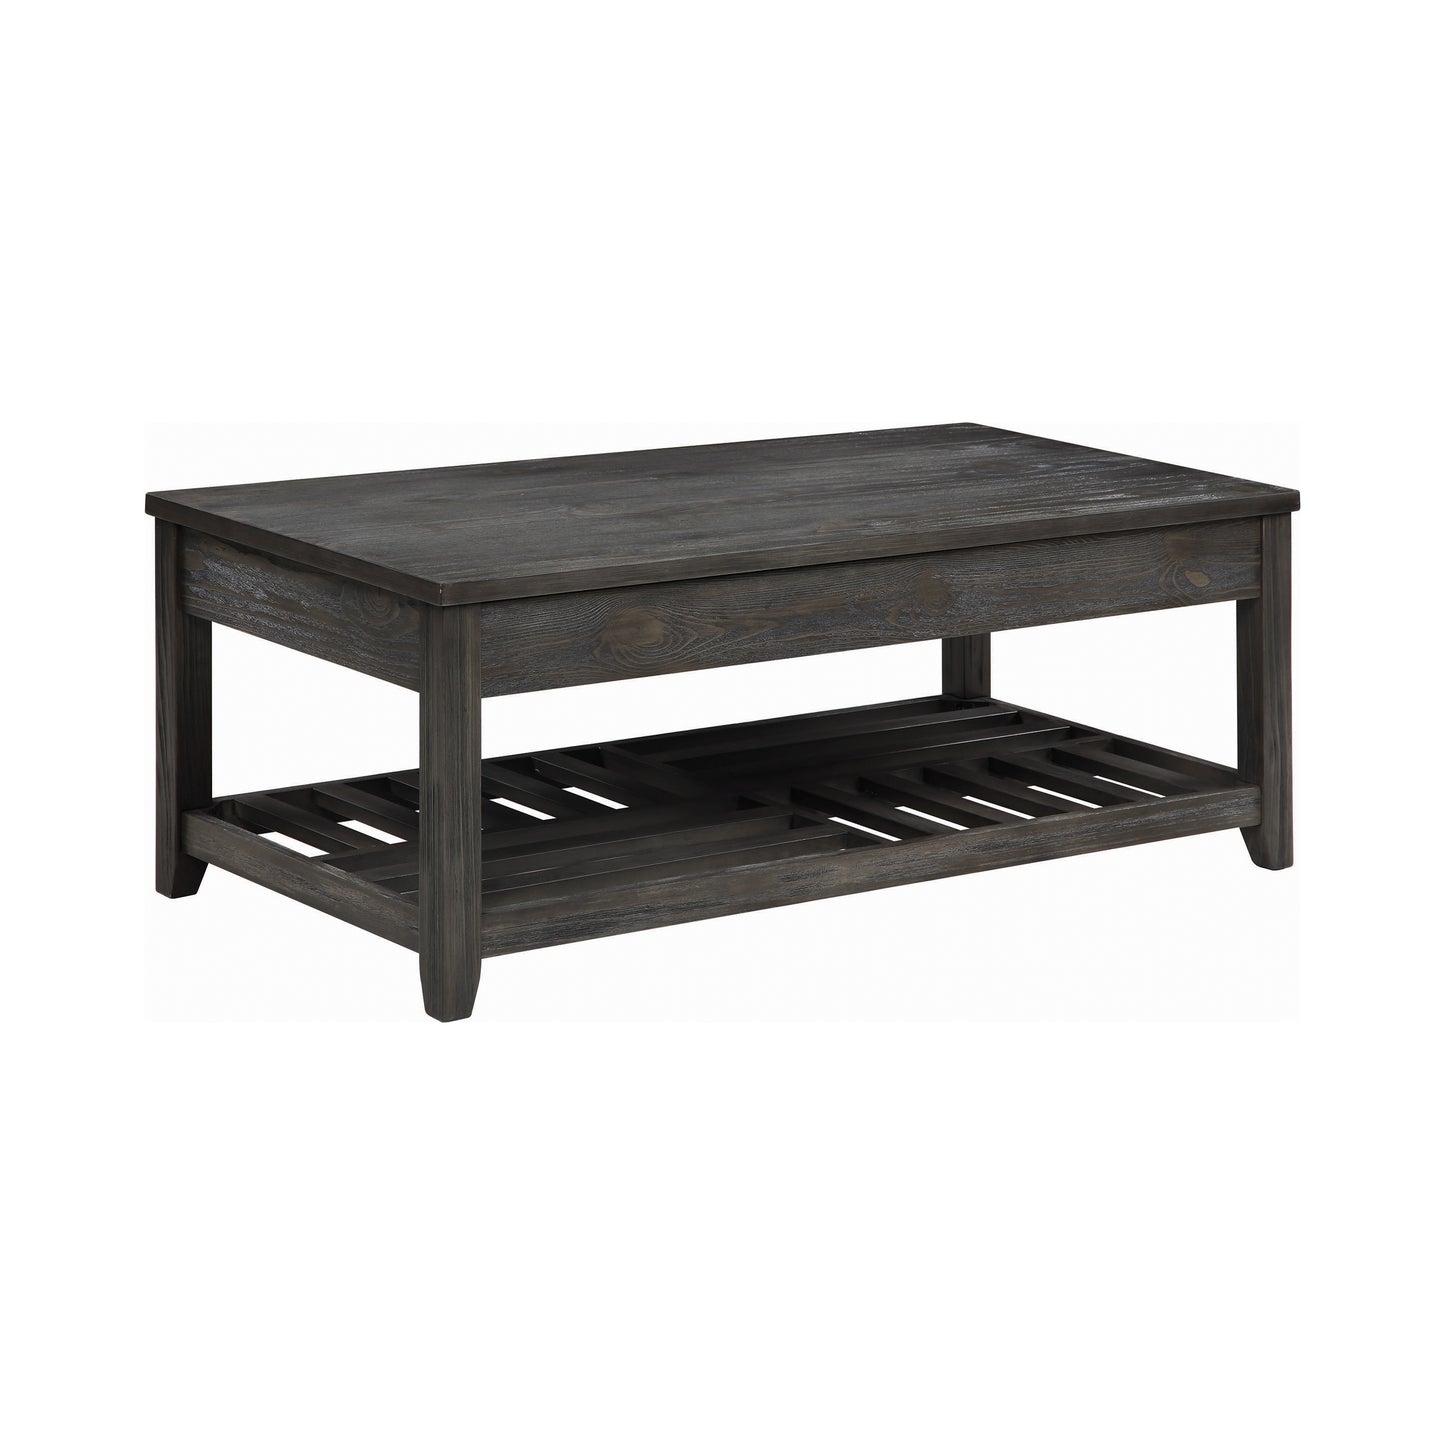 Lift Top Coffee Table with Storage Cavities Grey